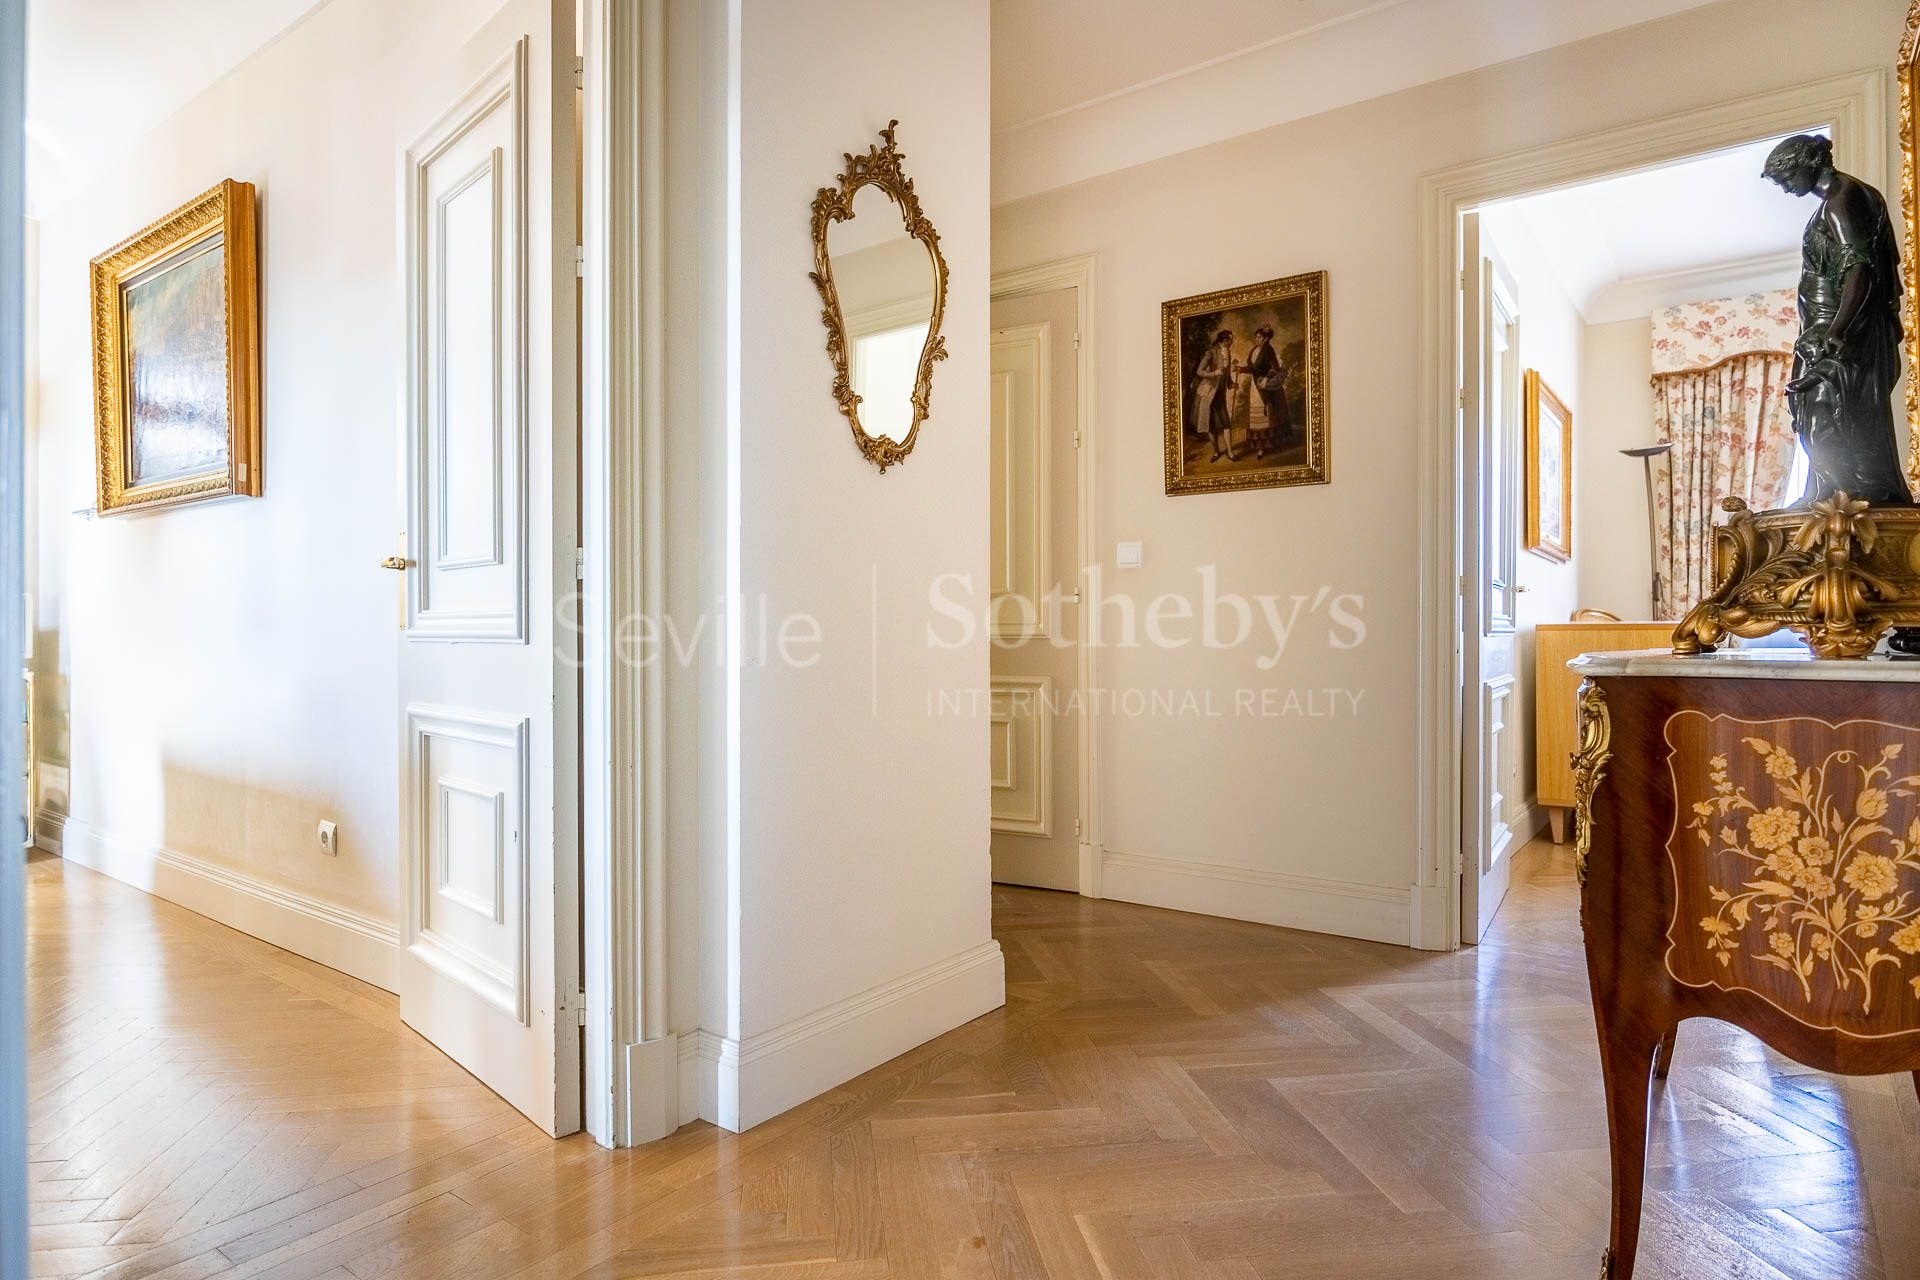 Splendid and stately apartment in one of the most exclusive areas of Jerez de la Frontera.